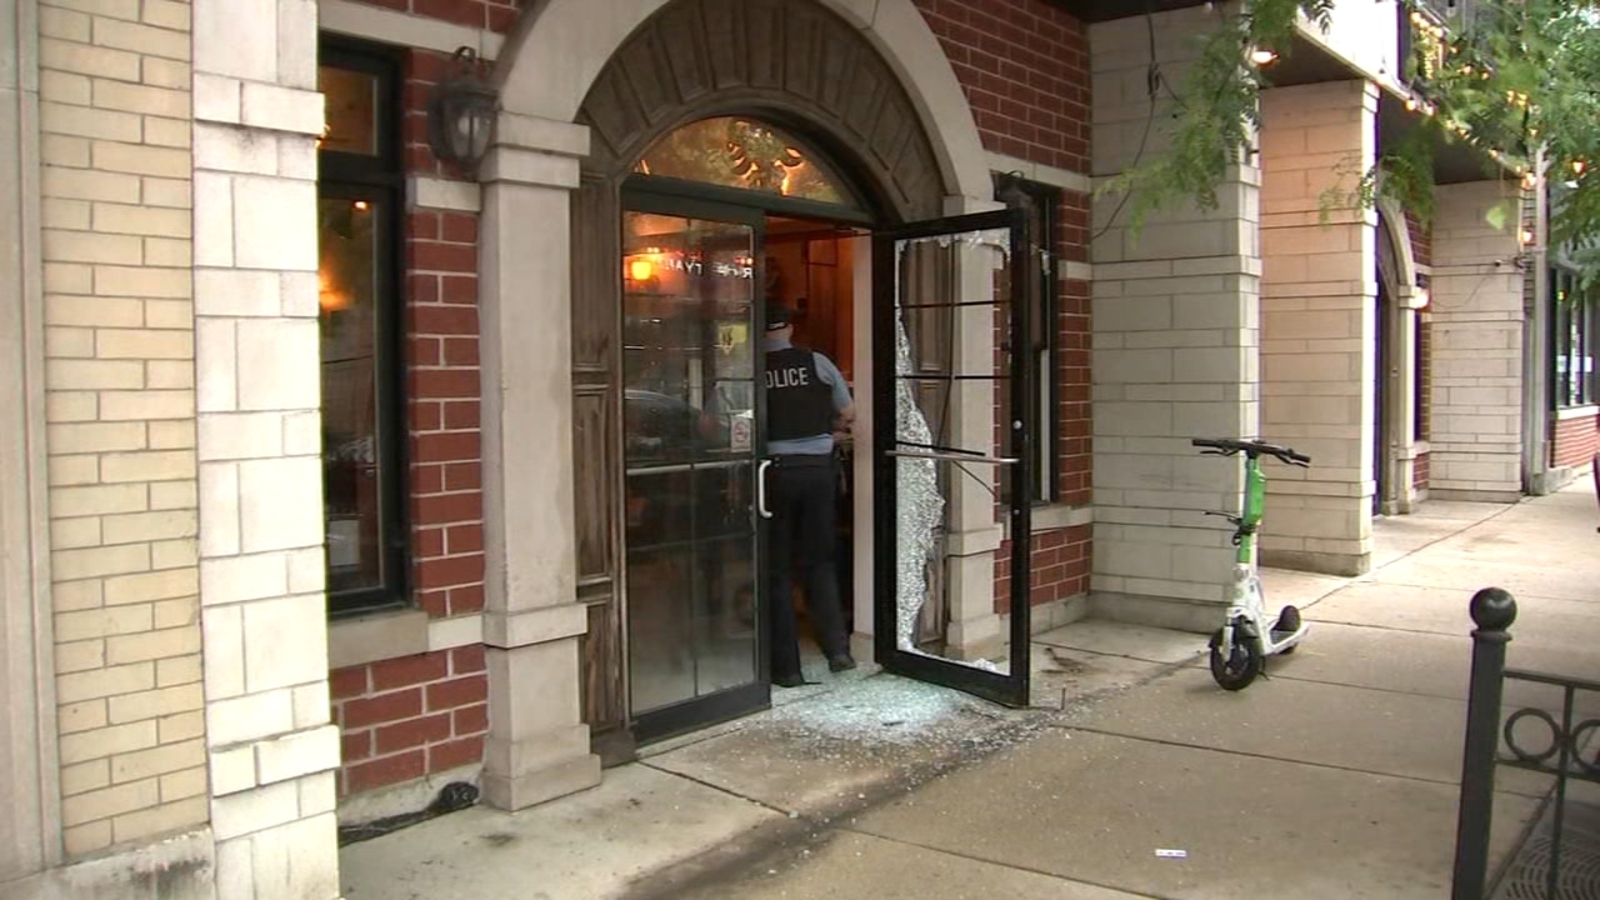 Smash-and-grab burglars target Las Tablas On Lincoln at 2942 North Lincoln Avenue in Lakeview, Chicago police say [Video]